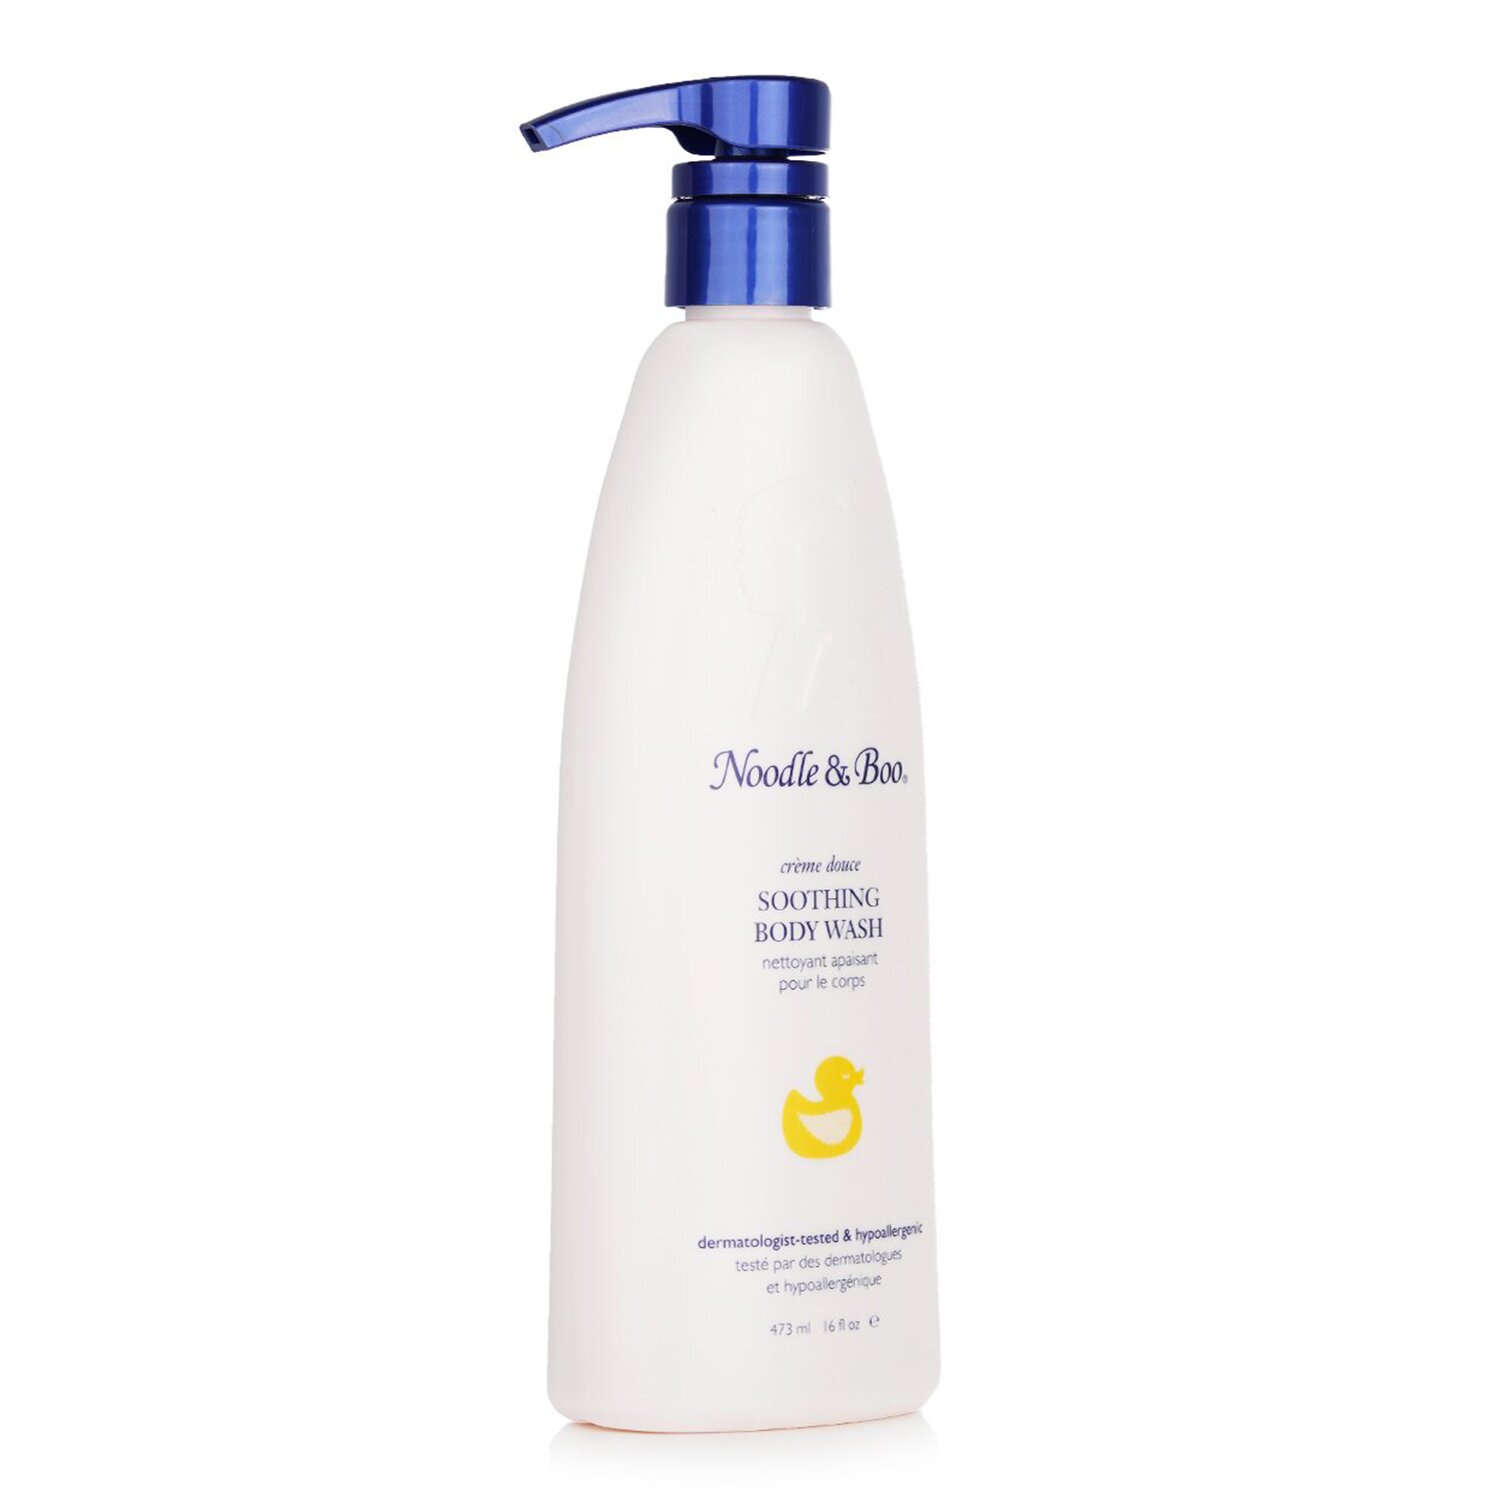 Noodle & Boo Soothing Body Wash - For Newborns & Babies with Sensitive Skin 473ml/16oz